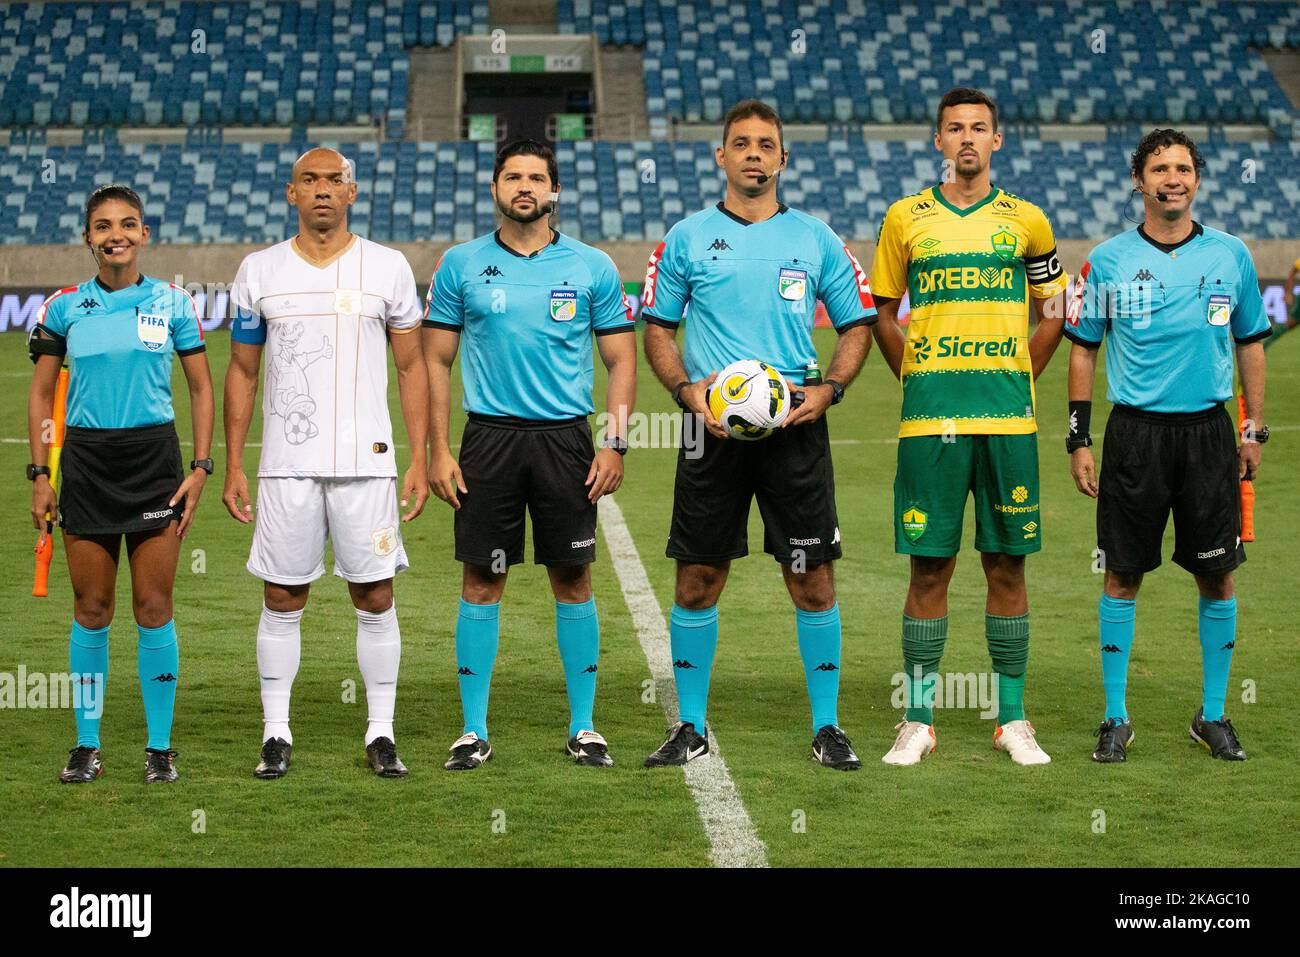 Cuiaba, Brazil. 02nd Nov, 2022. MT - Cuiaba - 11/02/2022 - COPA VERDE 2022, CUIABA X BRASILIENSE - Players from Cuiaba and Brasiliense pose for photos next to the referee before the match at the Arena Pantanal stadium for the Copa Verde 2022 championship. Photo: Gil Gomes/AGIF/Sipa USA Credit: Sipa USA/Alamy Live News Stock Photo